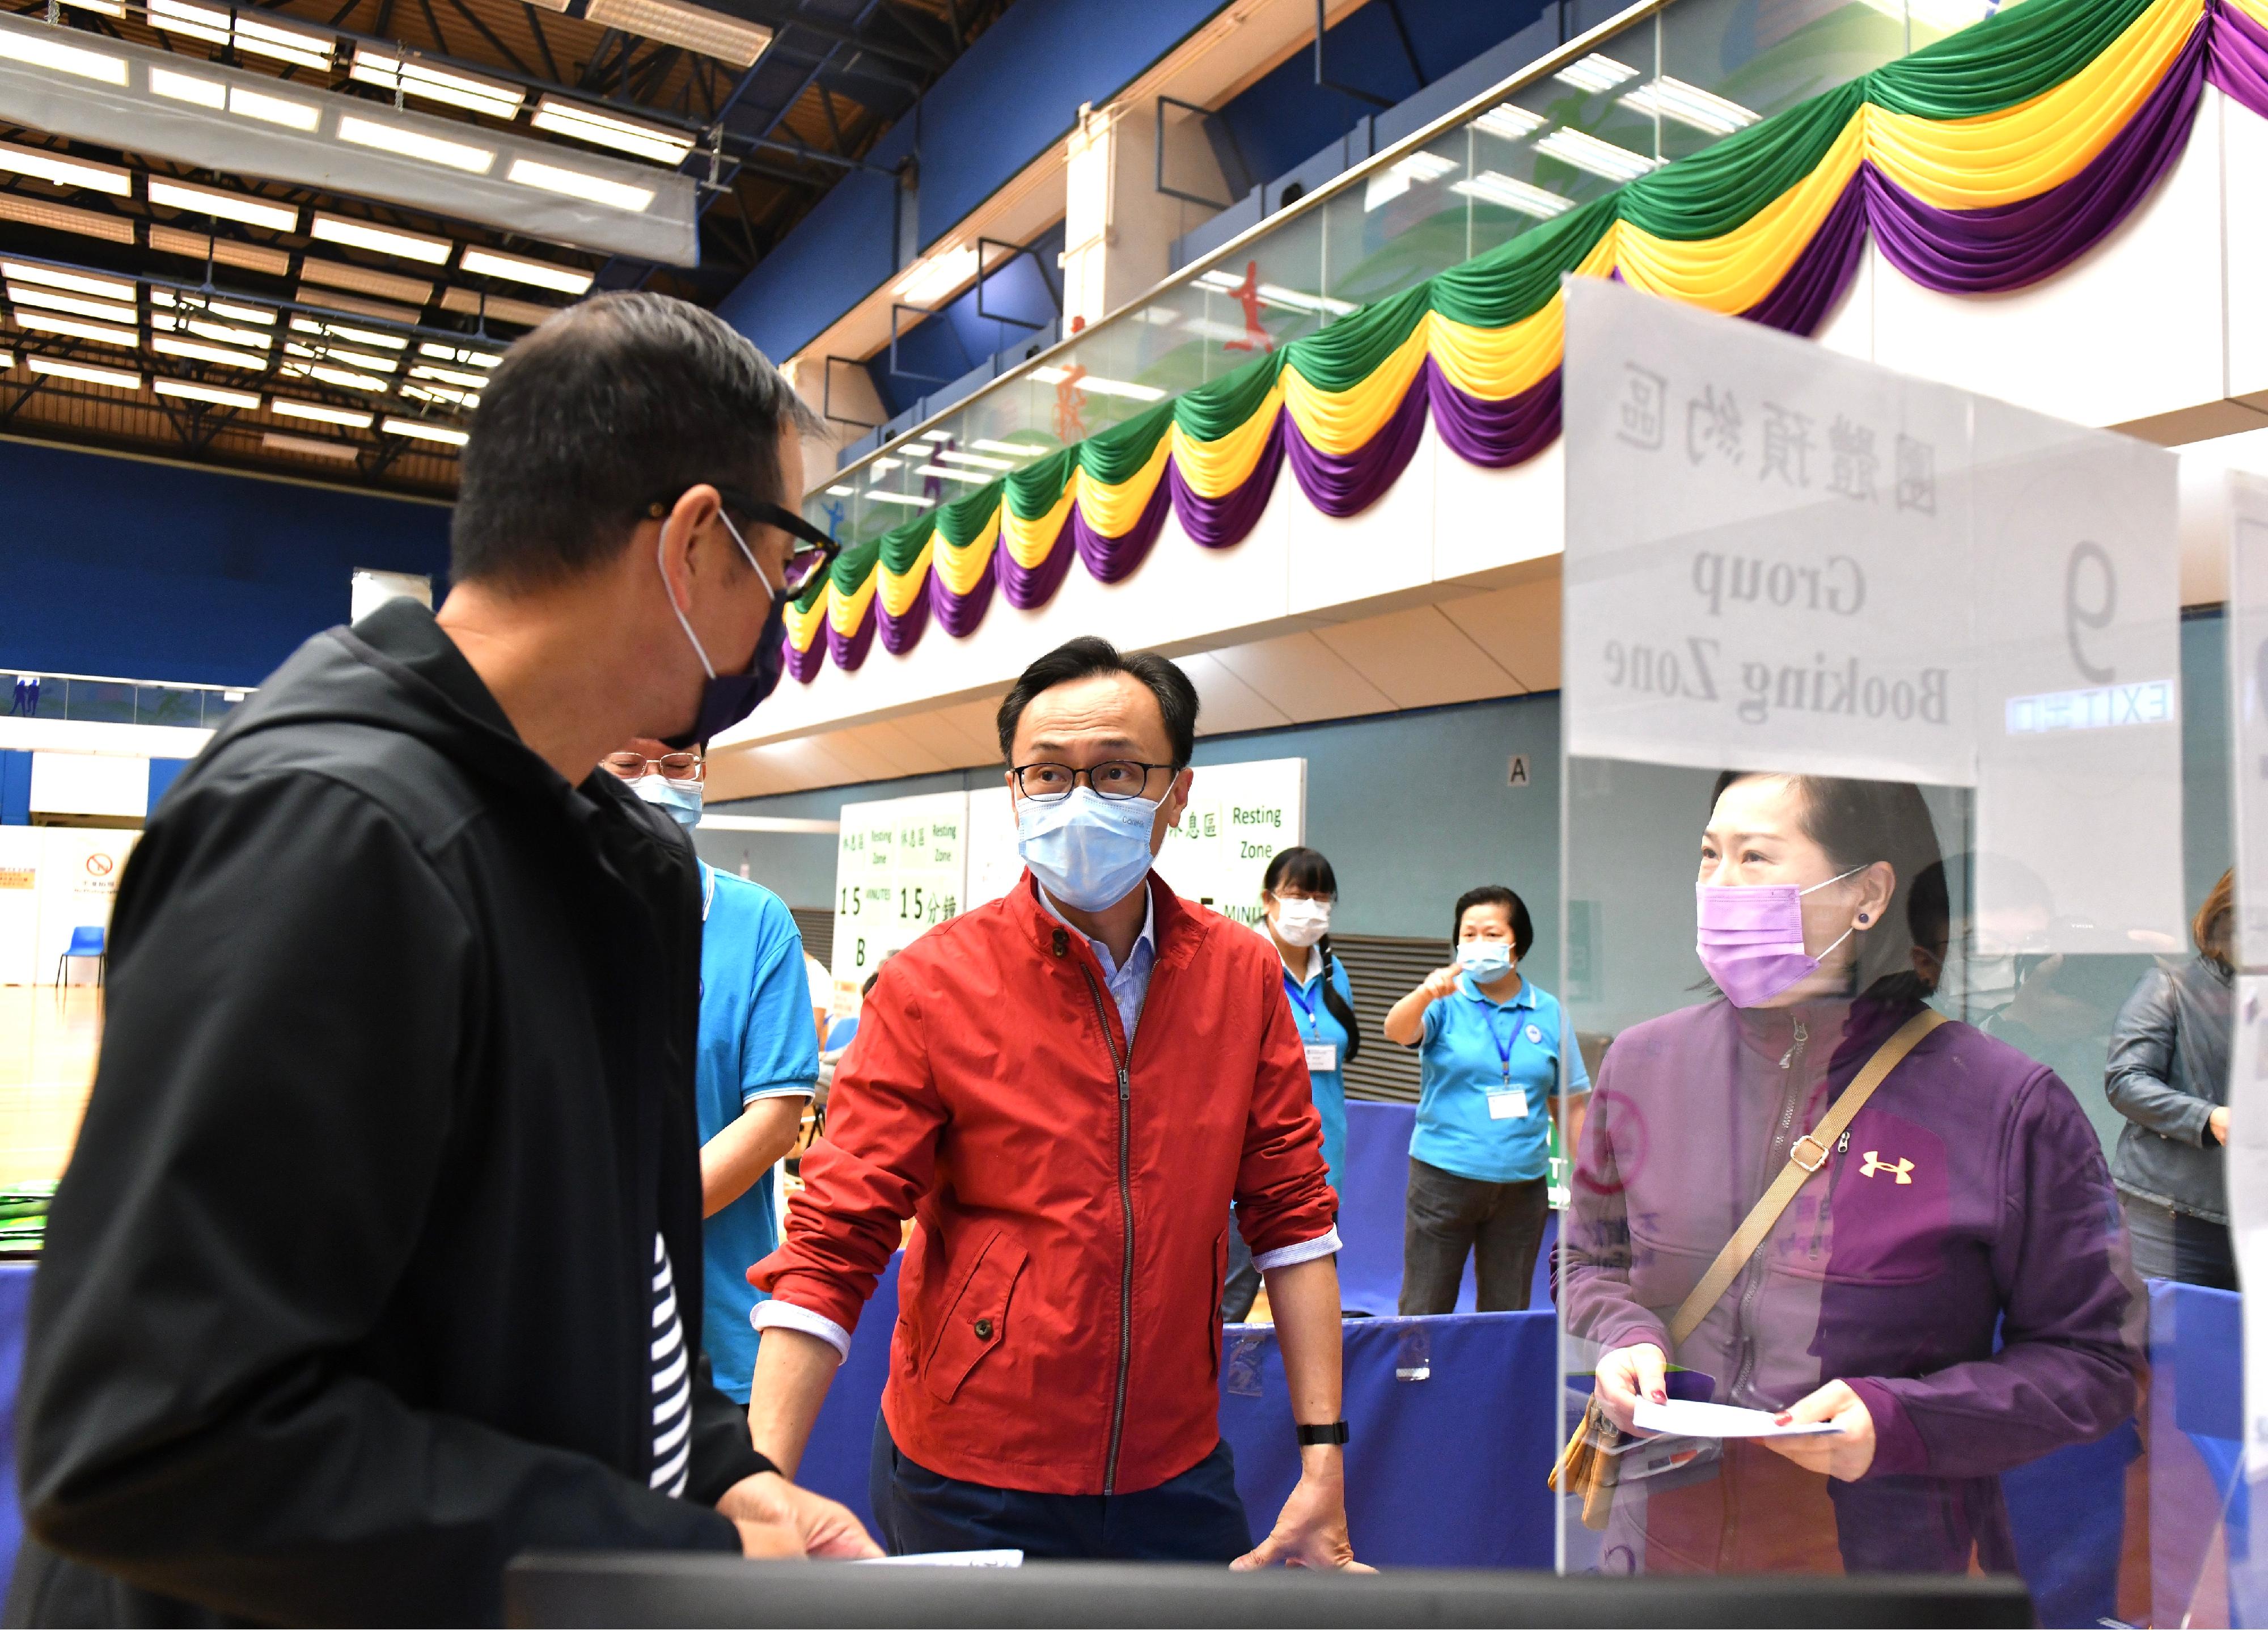 The Secretary for the Civil Service, Mr Patrick Nip, visited the Lai Chi Kok Park Sports Centre today (January 1) to see for himself the first day operation of the Community Vaccination Centre there after the extension of its opening hours and to appeal to the public to get vaccinated as early as possible. Photo shows Mr Nip (centre) chatting with members of the public who will receive COVID-19 vaccination there.

